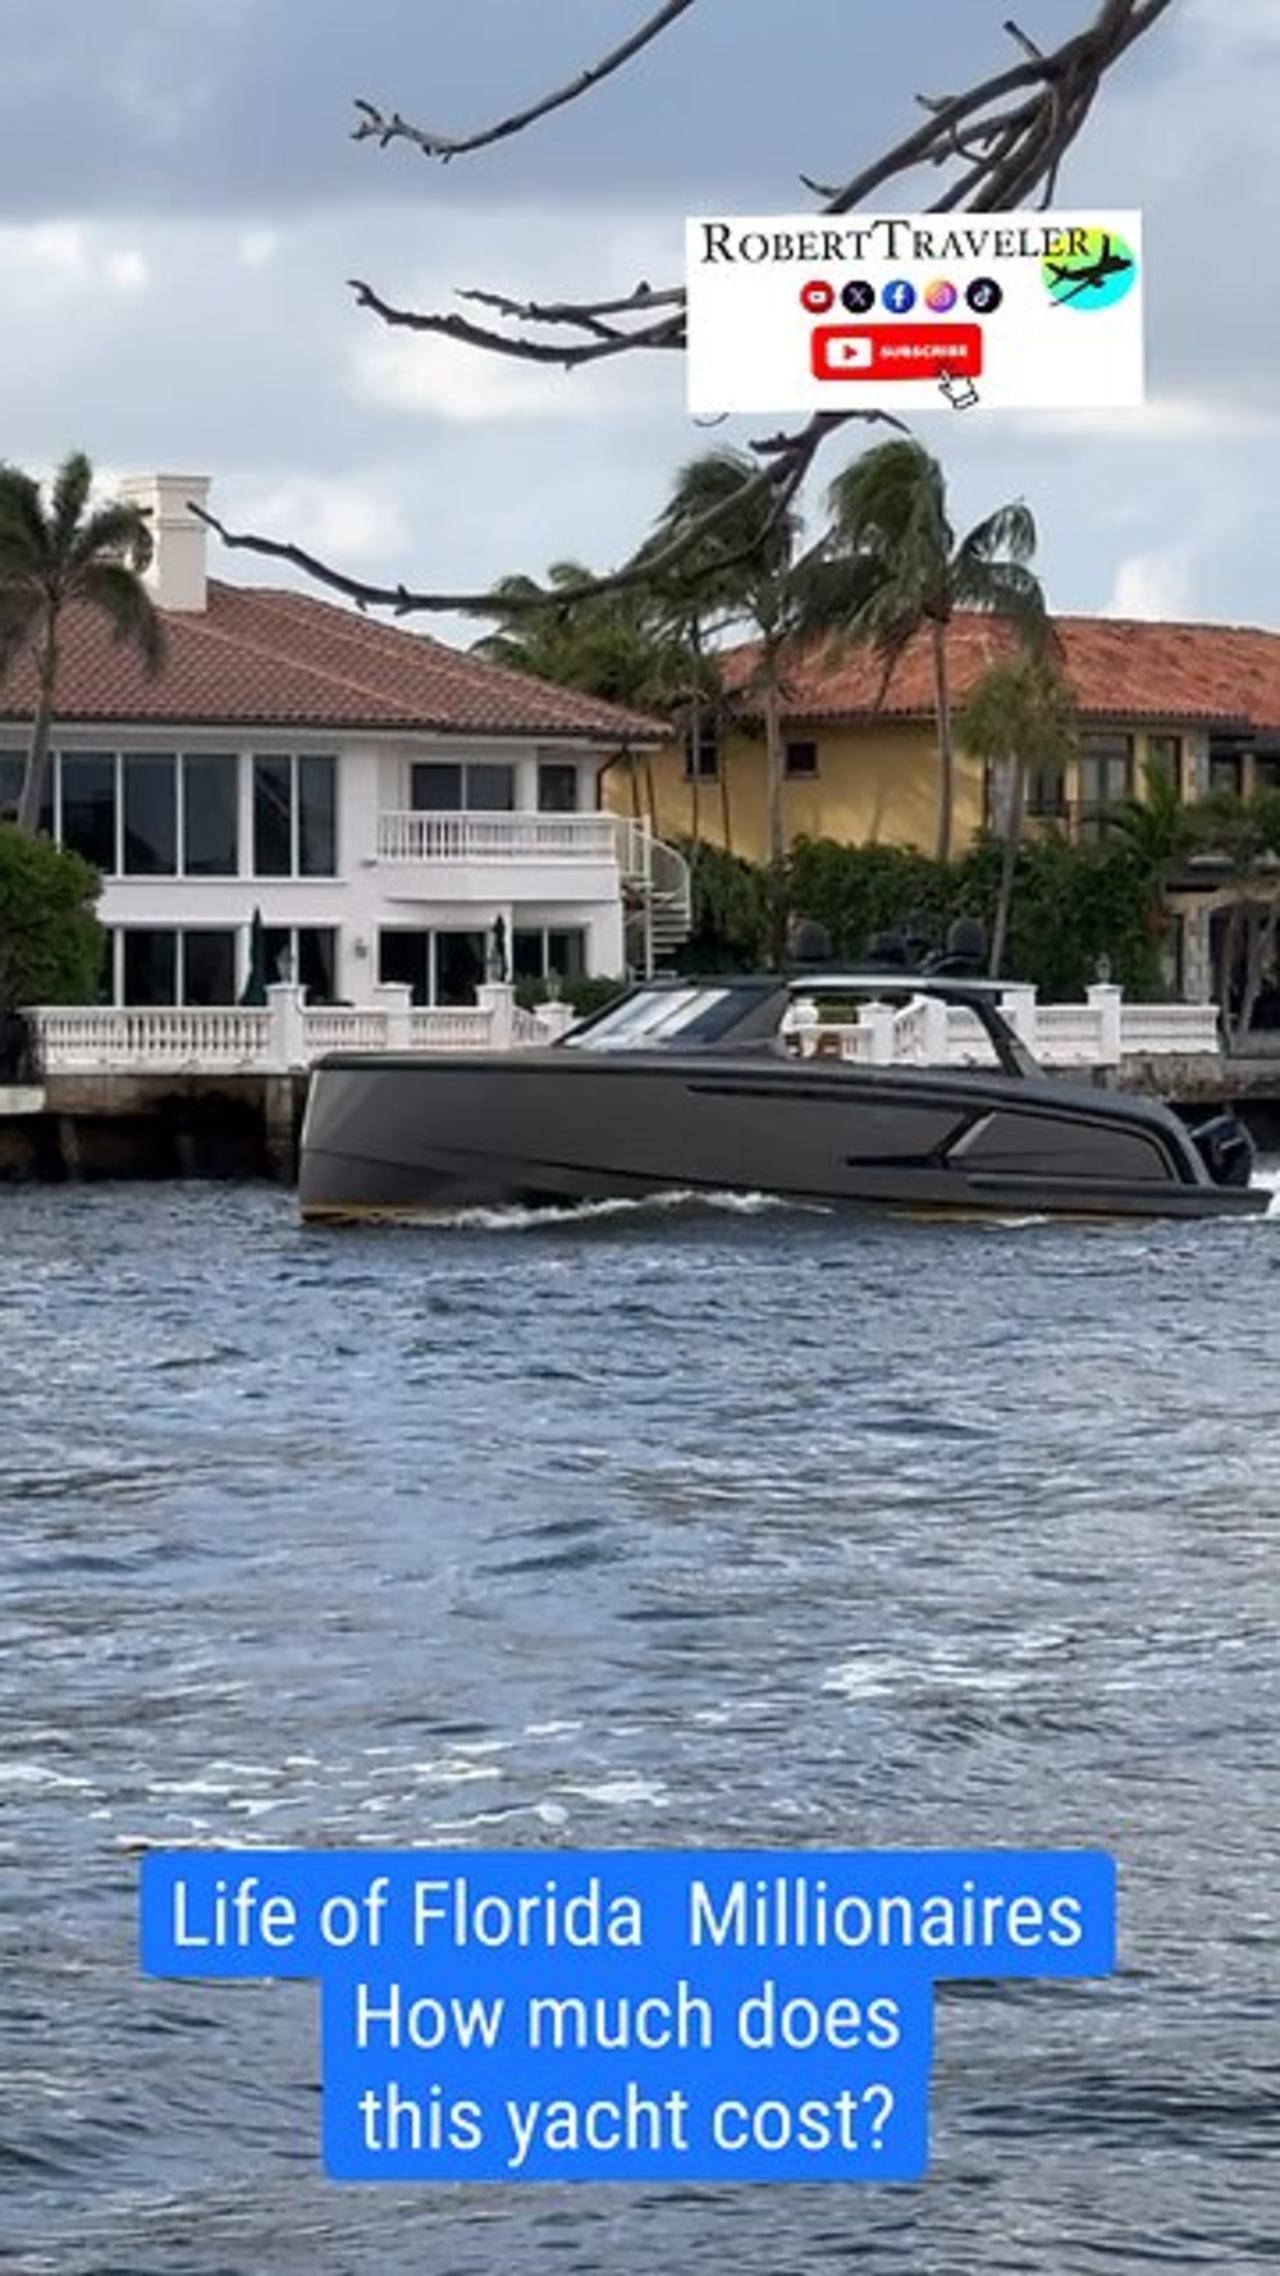 Life of Florida  Millionaires What do you think, how much does this yacht cost?